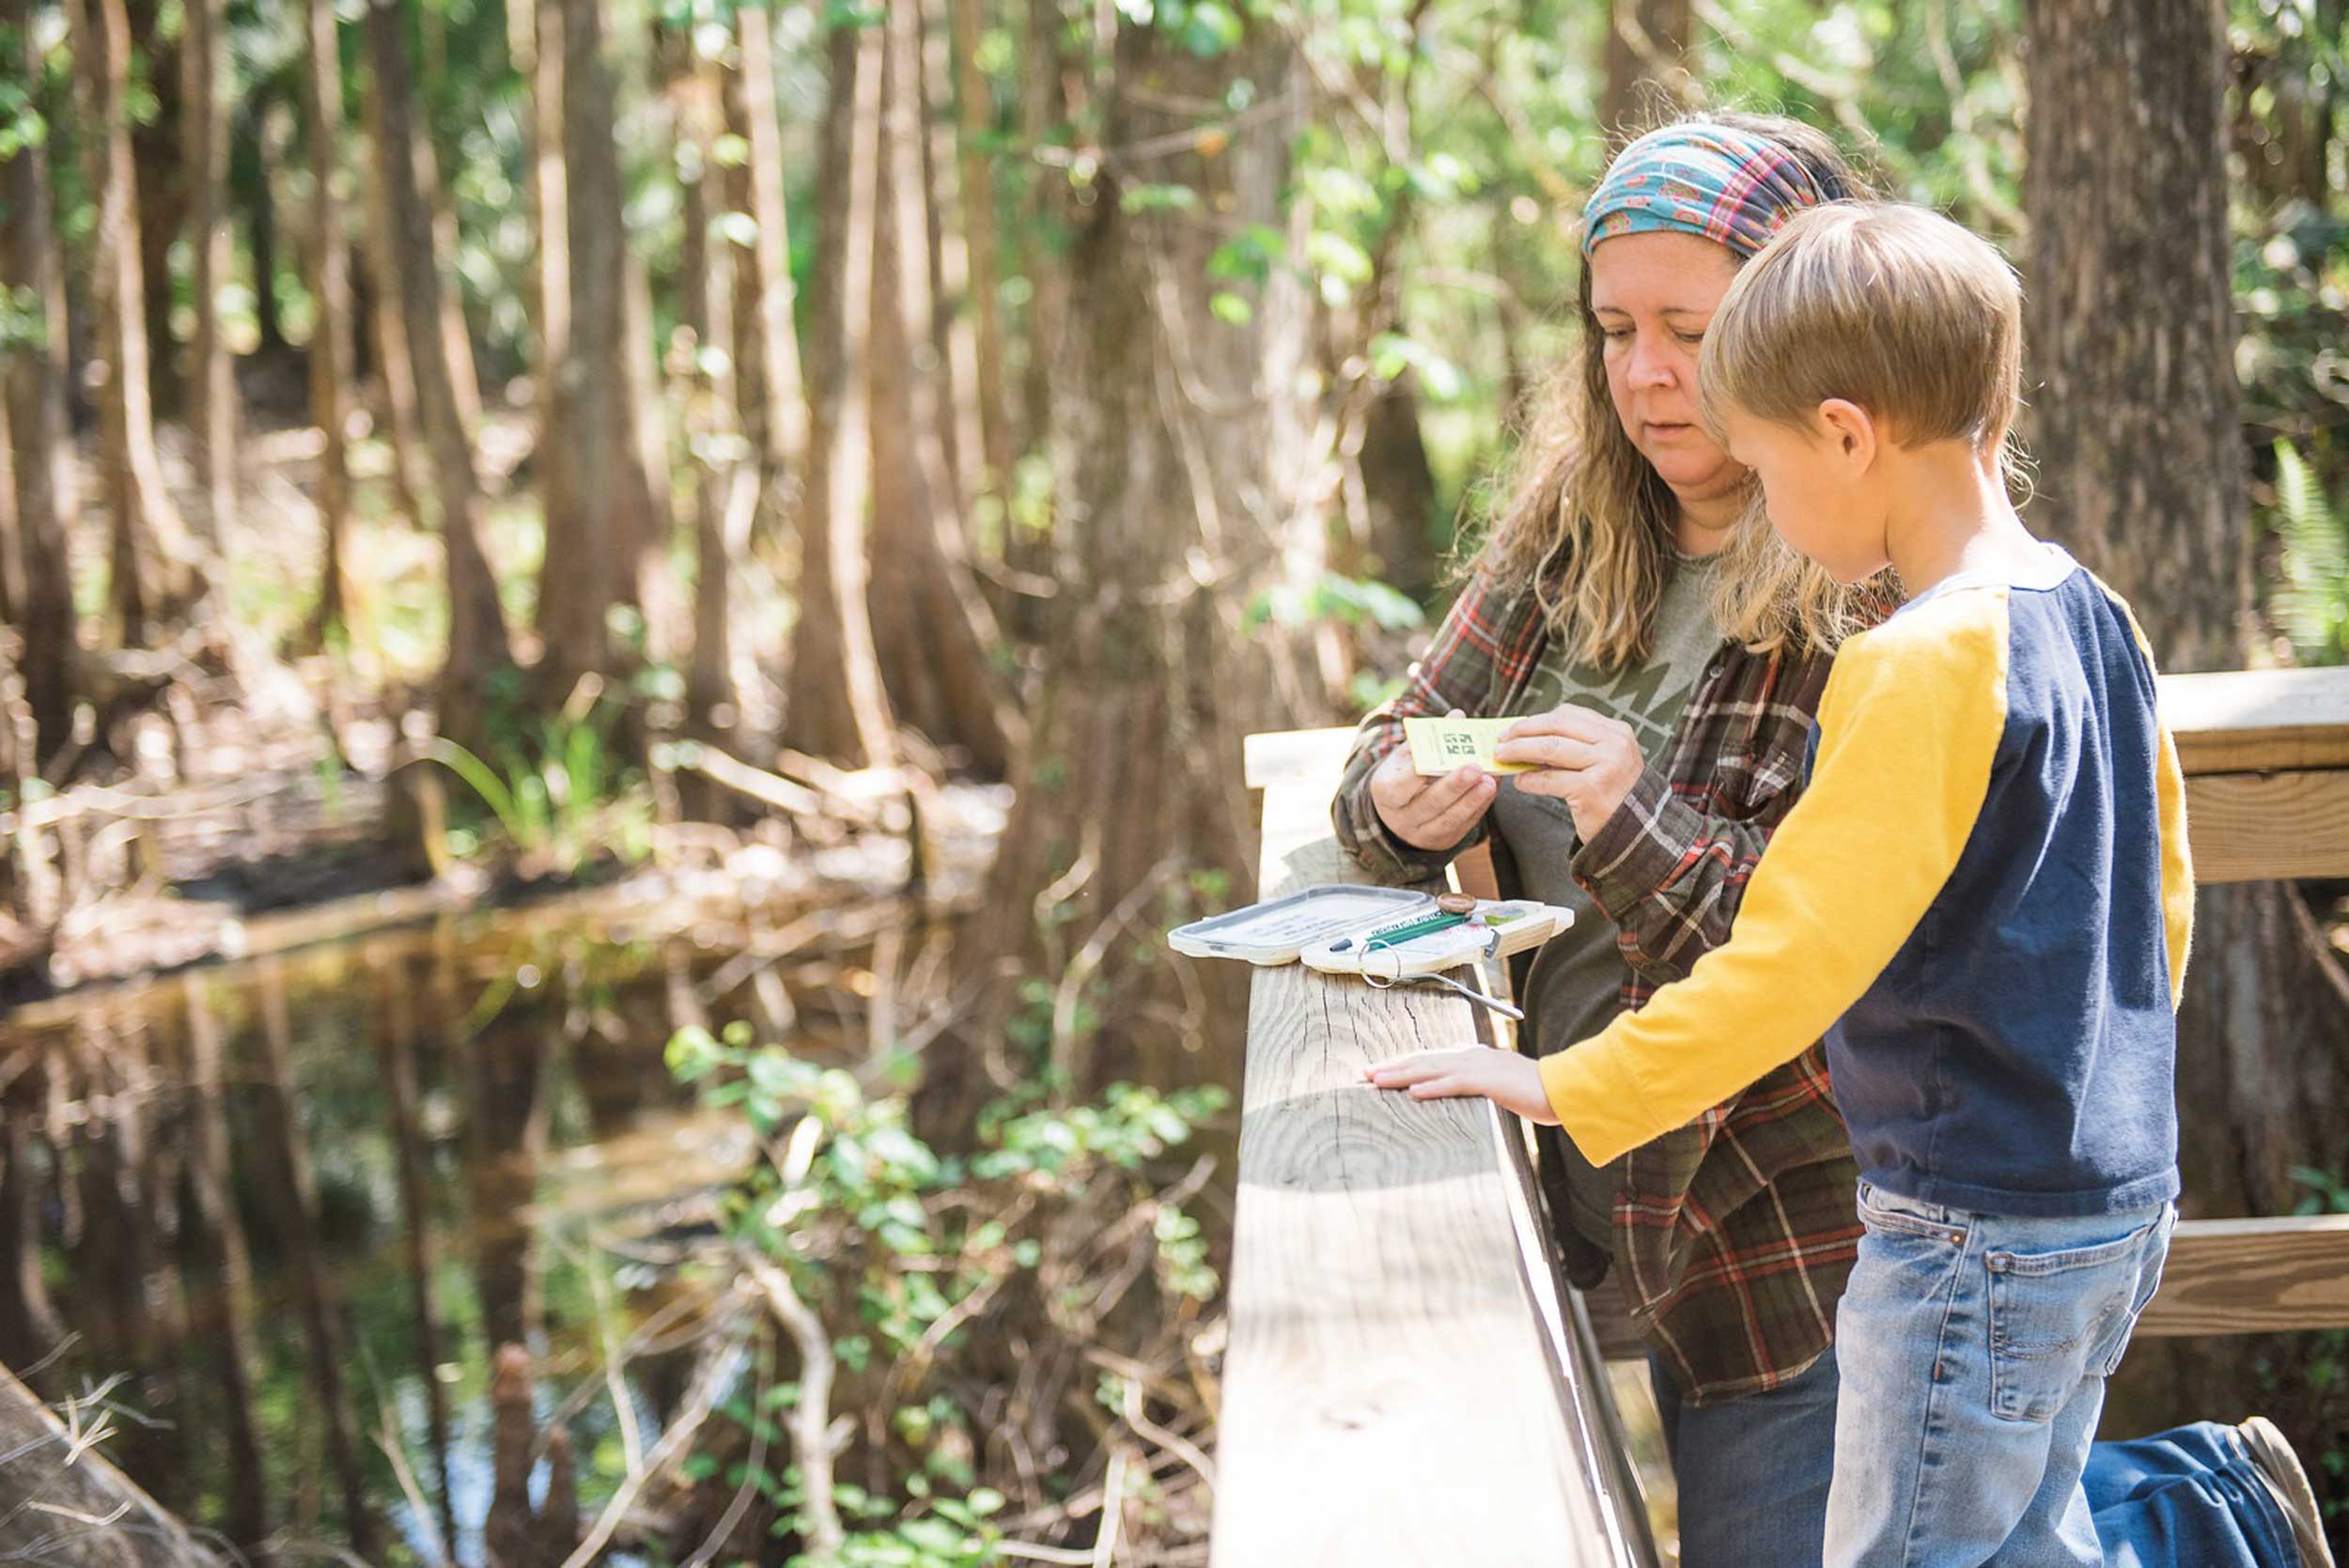 Woman and child survey nature in Highlands Hammock State Park